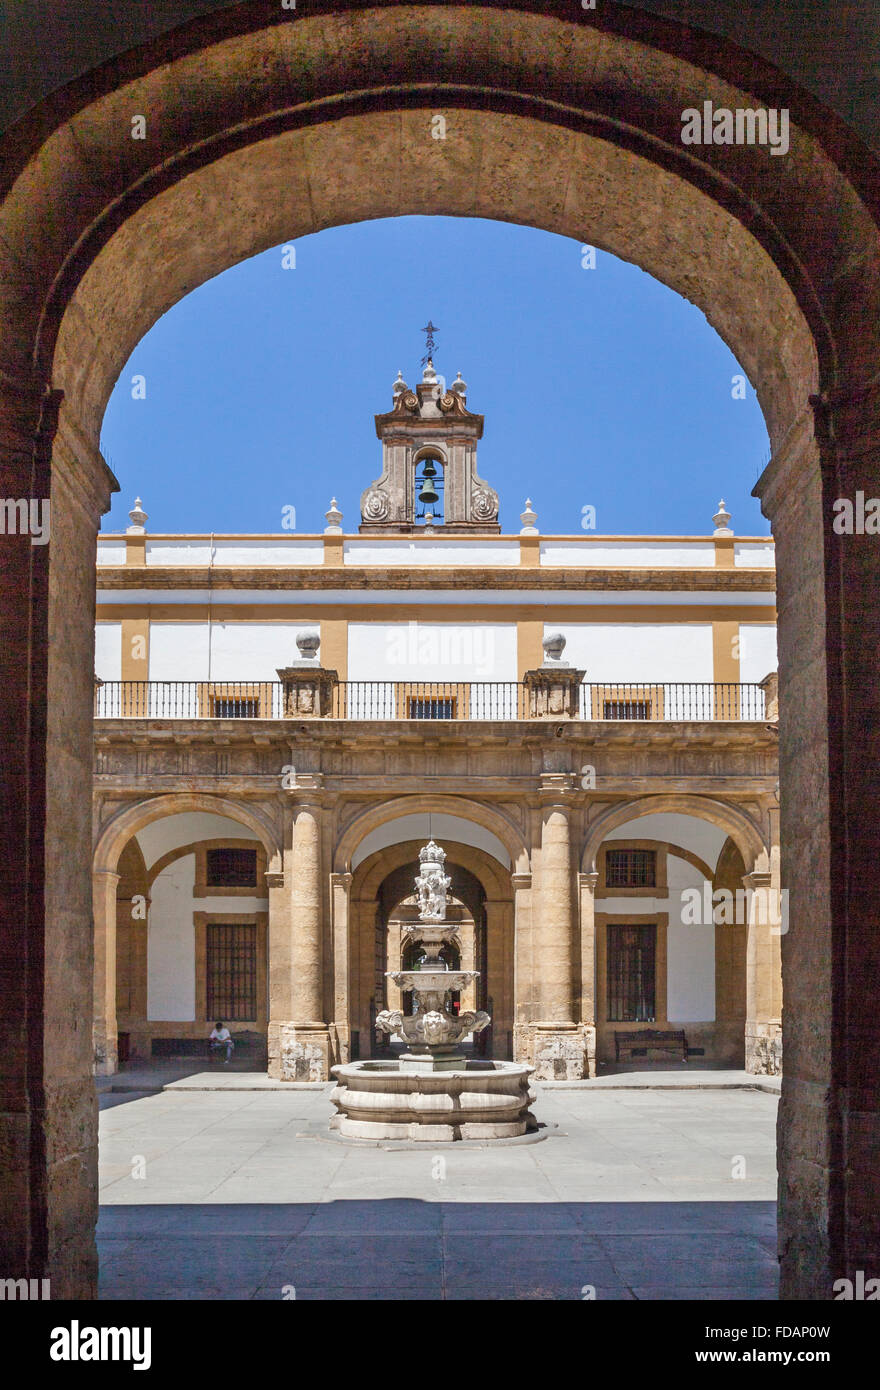 Spain, Andalusia, Province of Seville, Seville, Main courtyard at the Rectorate building of the University of Seville Stock Photo